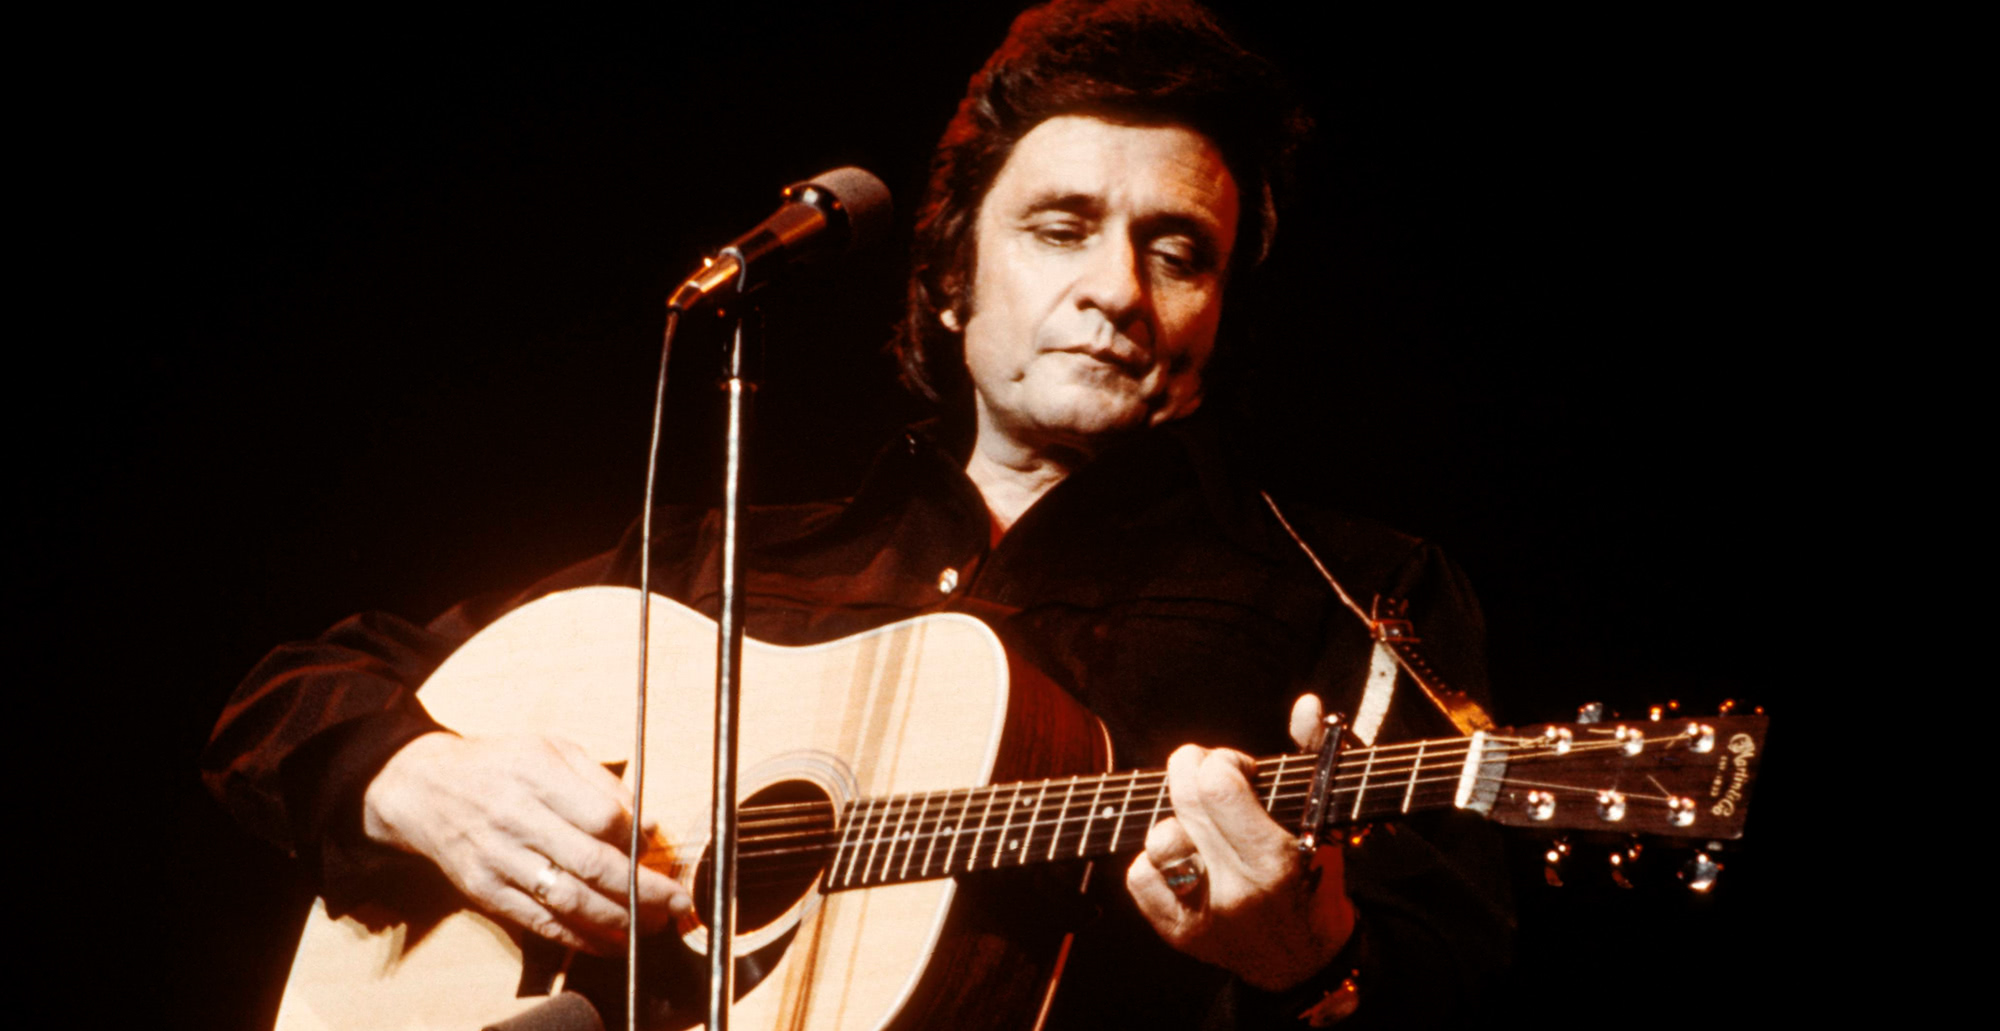 Learn to Play Learn to play The General Lee by Johnny Cash | LickLibrary